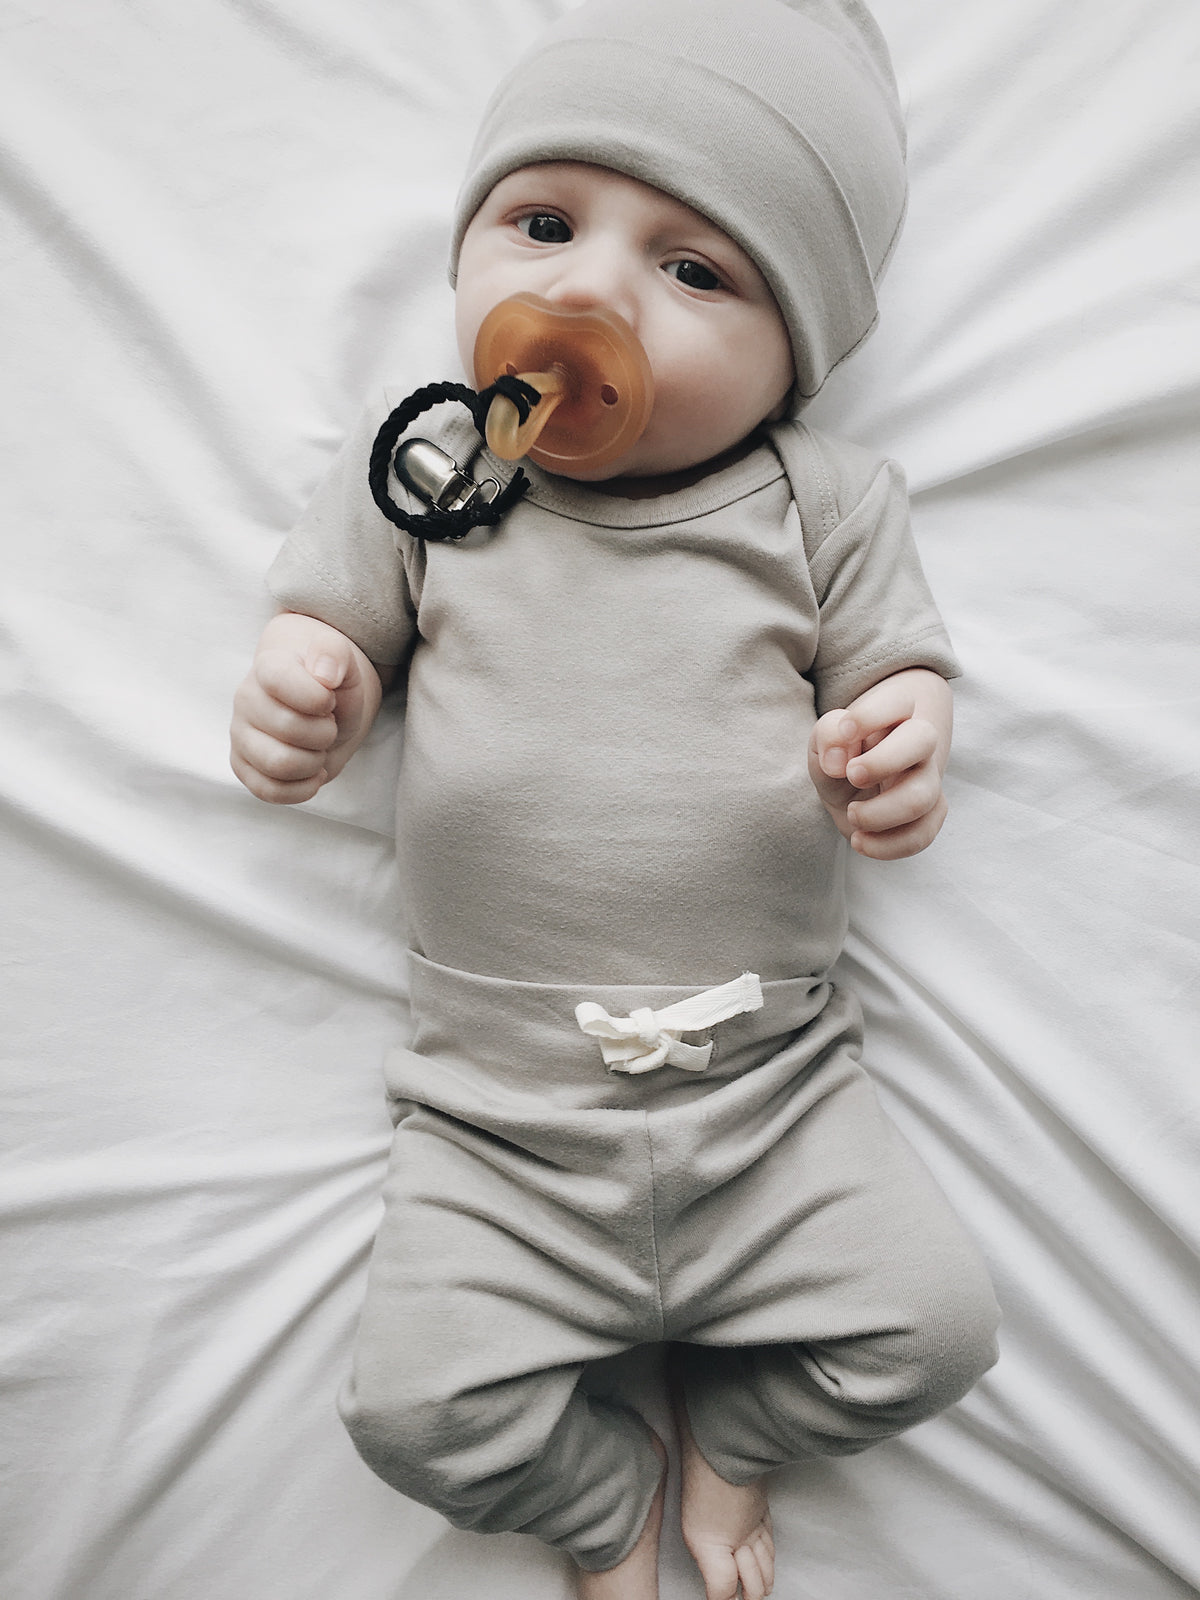 Lucy Lue Organics. Ivory organic bodysuit. Organic baby clothes. Organic newborn outfit. Organic cotton. Organic kids clothes. Organic baby fashion. Ethical clothing. Gender neutral colors. Minimalist modern baby style. Organic Baby products.